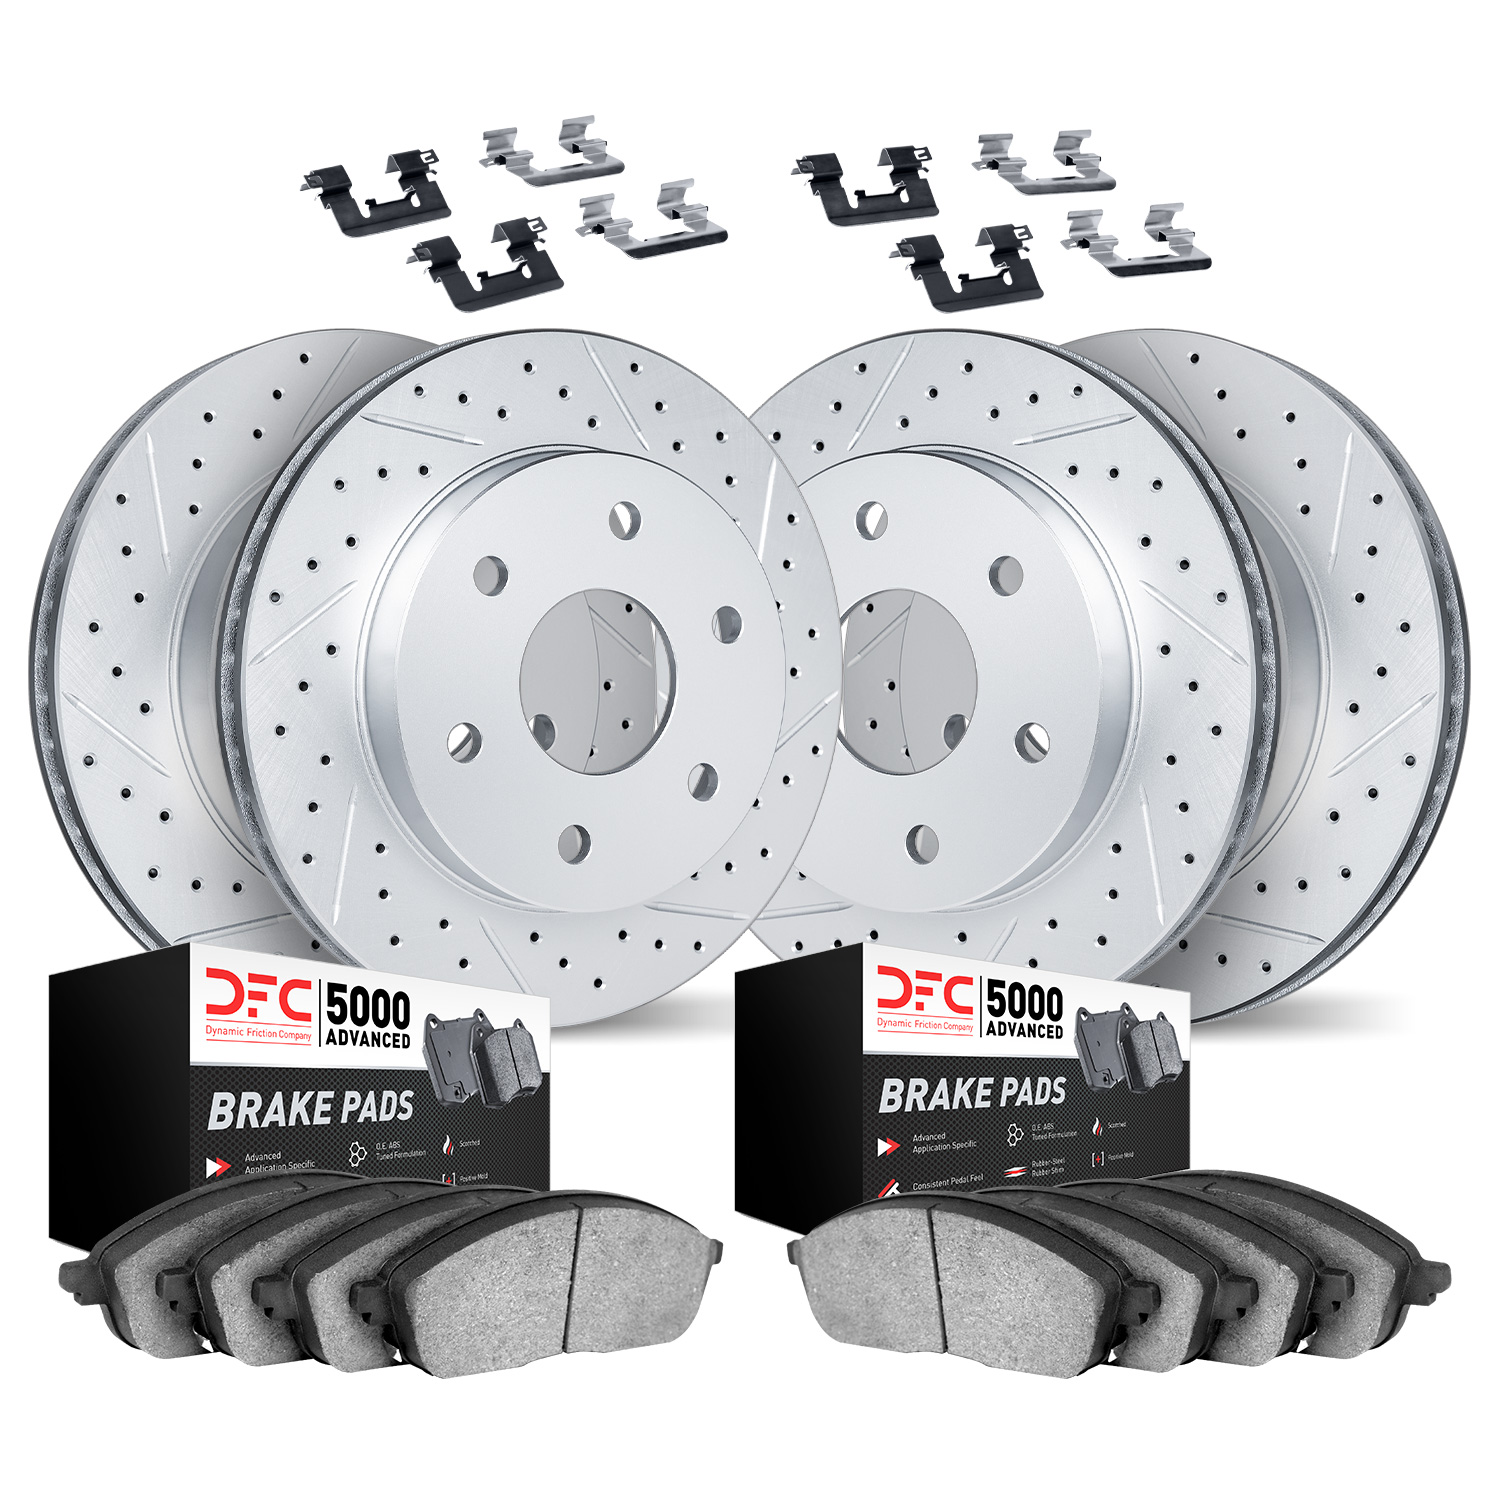 2514-40084 Geoperformance Drilled/Slotted Rotors w/5000 Advanced Brake Pads Kit & Hardware, 2003-2017 Mopar, Position: Front and